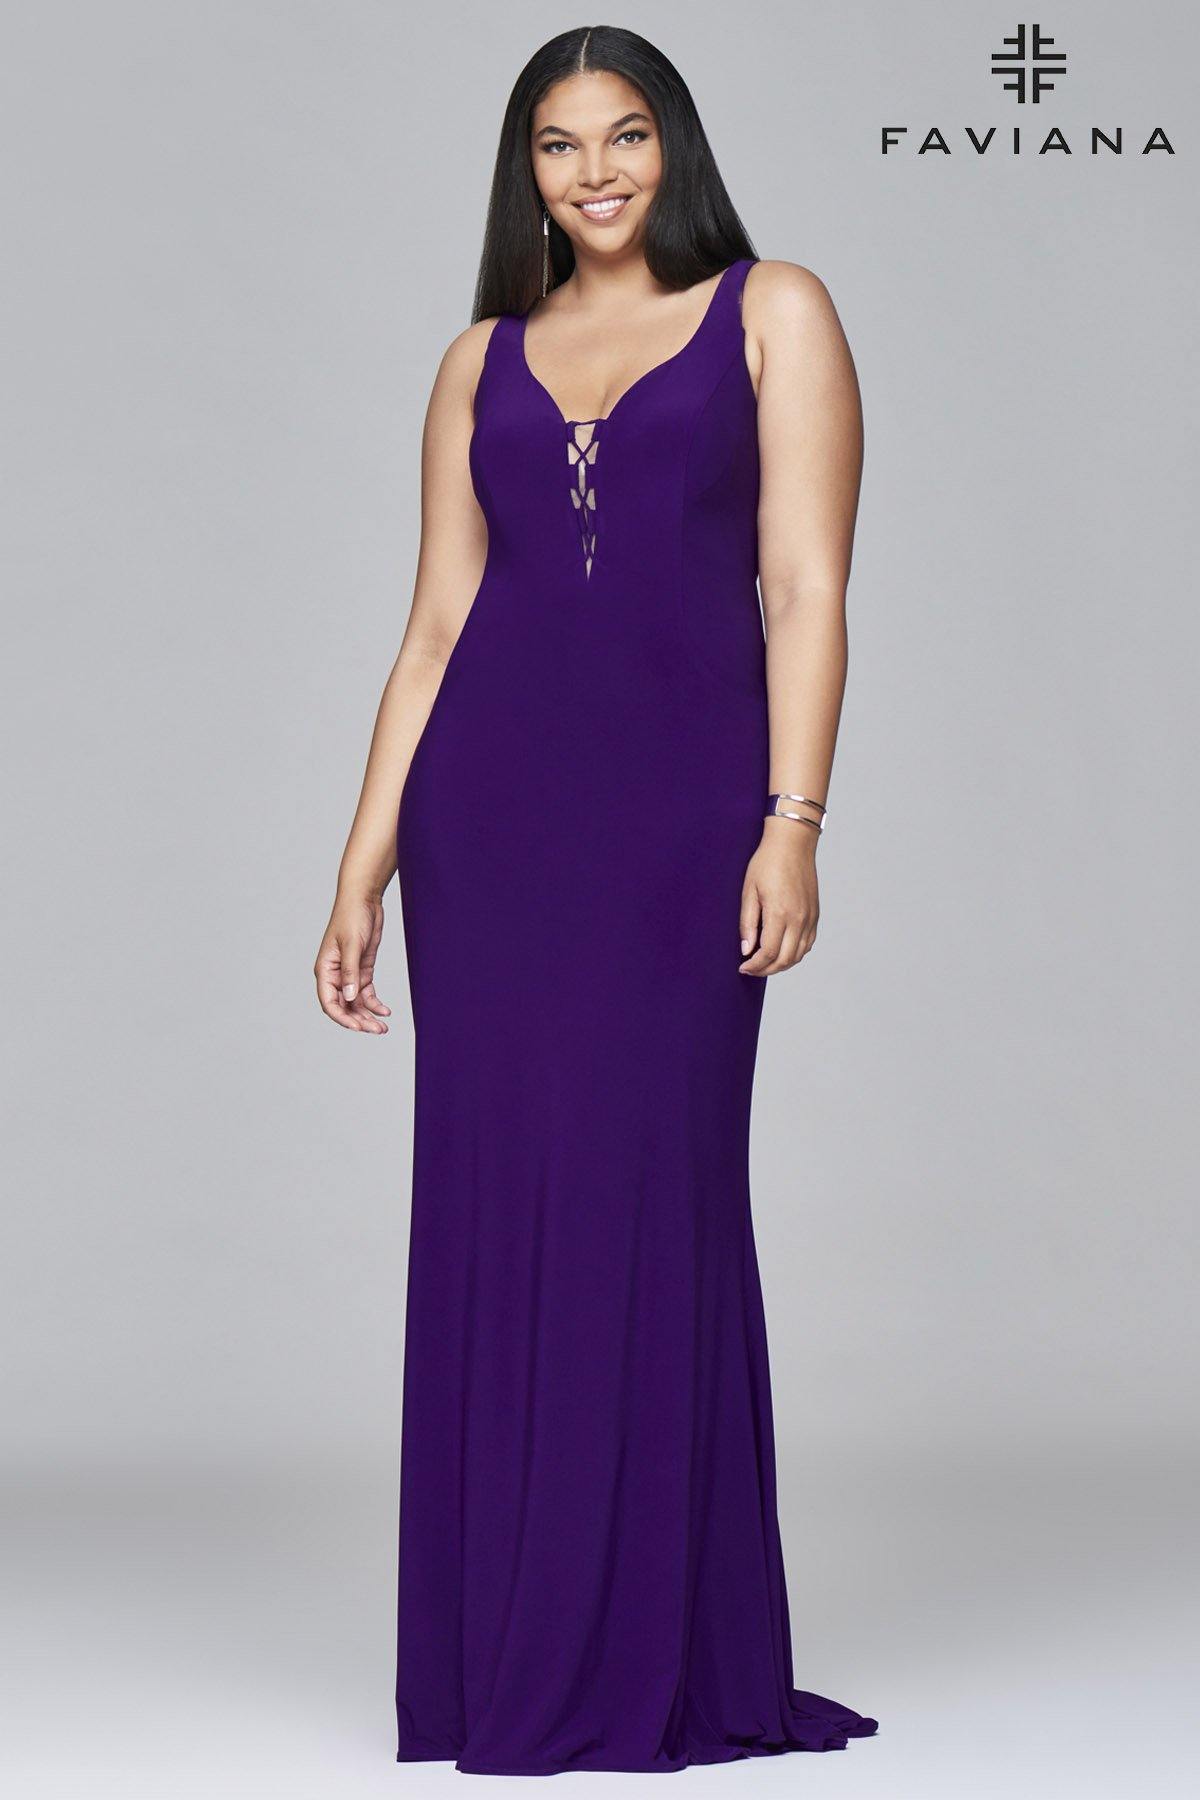 Faviana 9416 Lace-Up Fitted Plus Size Long Formal Dress - The Dress Outlet Faviana